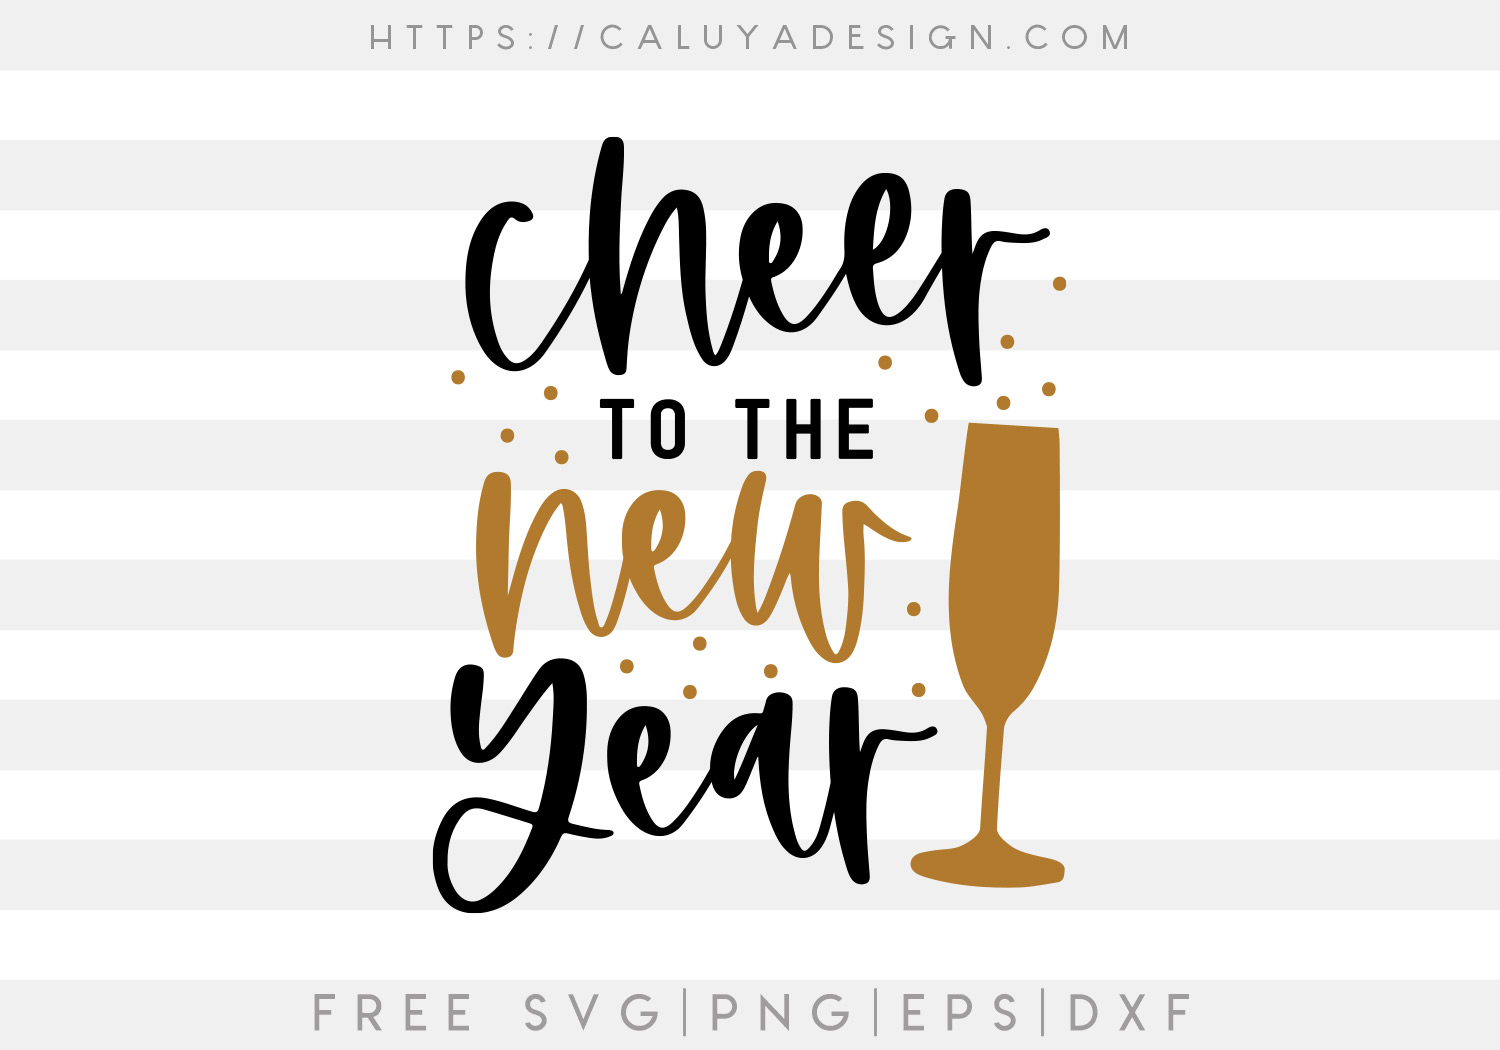 Cheer To the New Year SVG, PNG, EPS & DXF